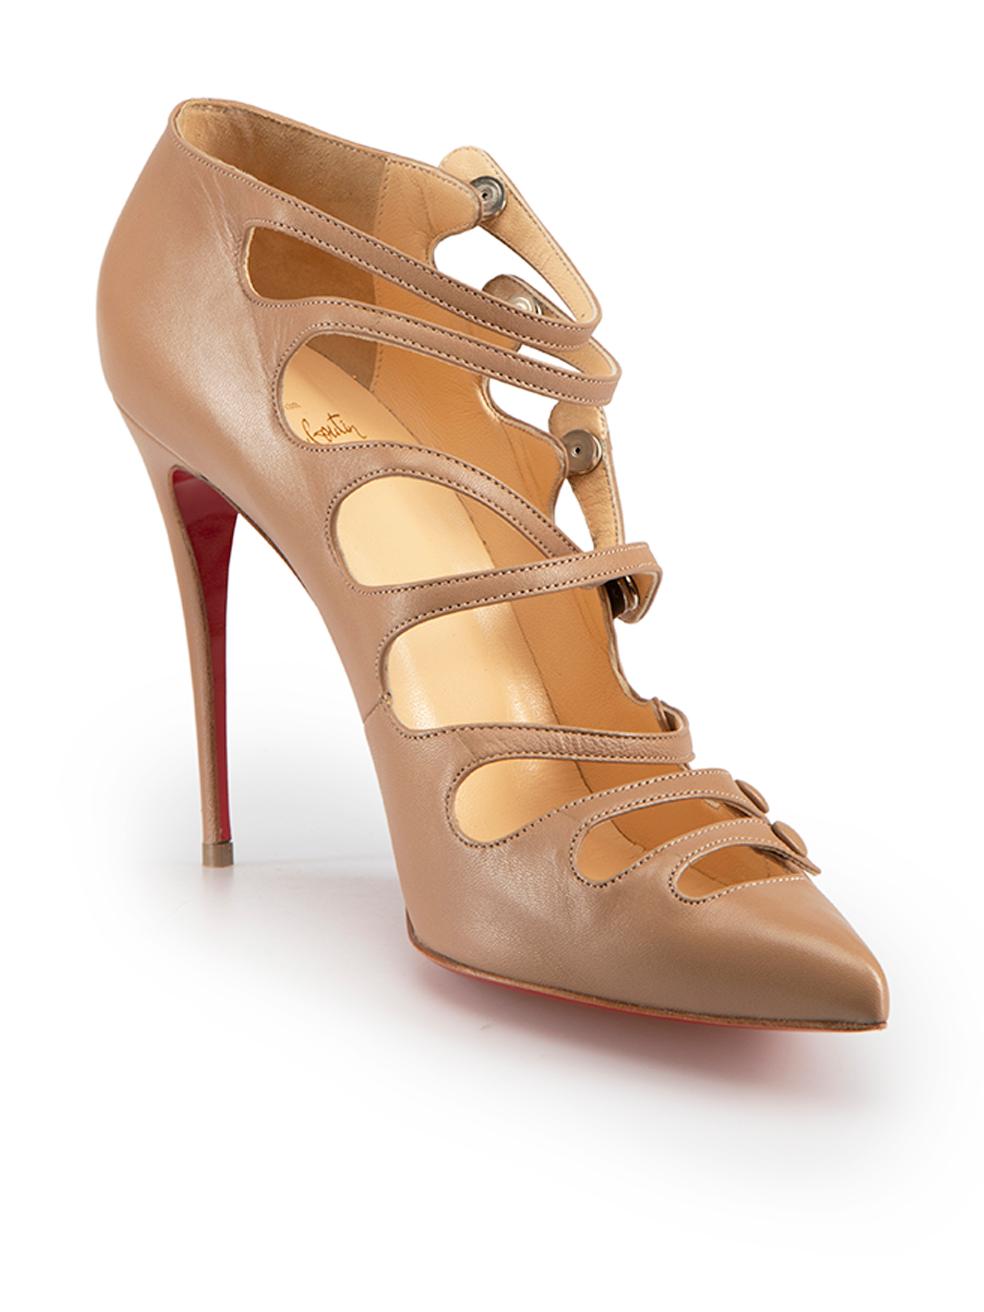 CONDITION is Very good. Hardly any visible wear to heels is evident on this used Christian Louboutin designer resale item. Comes in original box with dust bag.
 
 Details
 Viennana
 Beige
 Leather
 Strappy heels
 Pointed toe
 High heel
 Snap buttons